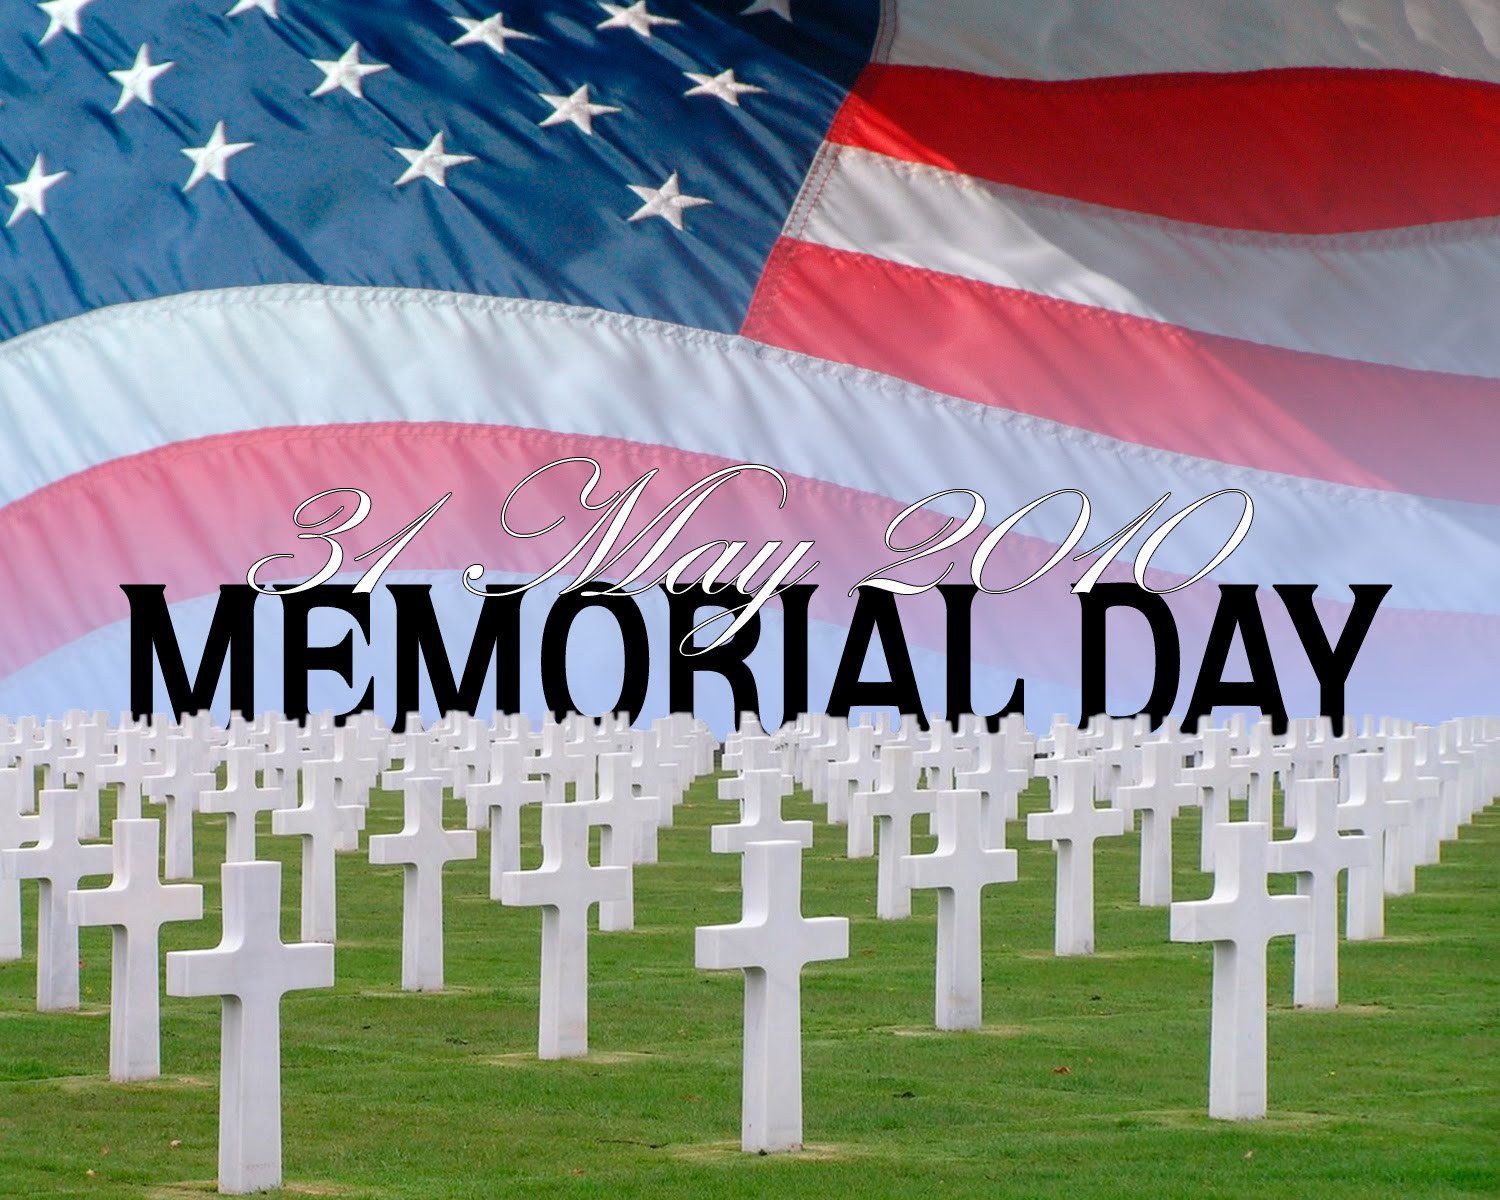 Memorial Day Wallpaper Image Photos Pictures Background